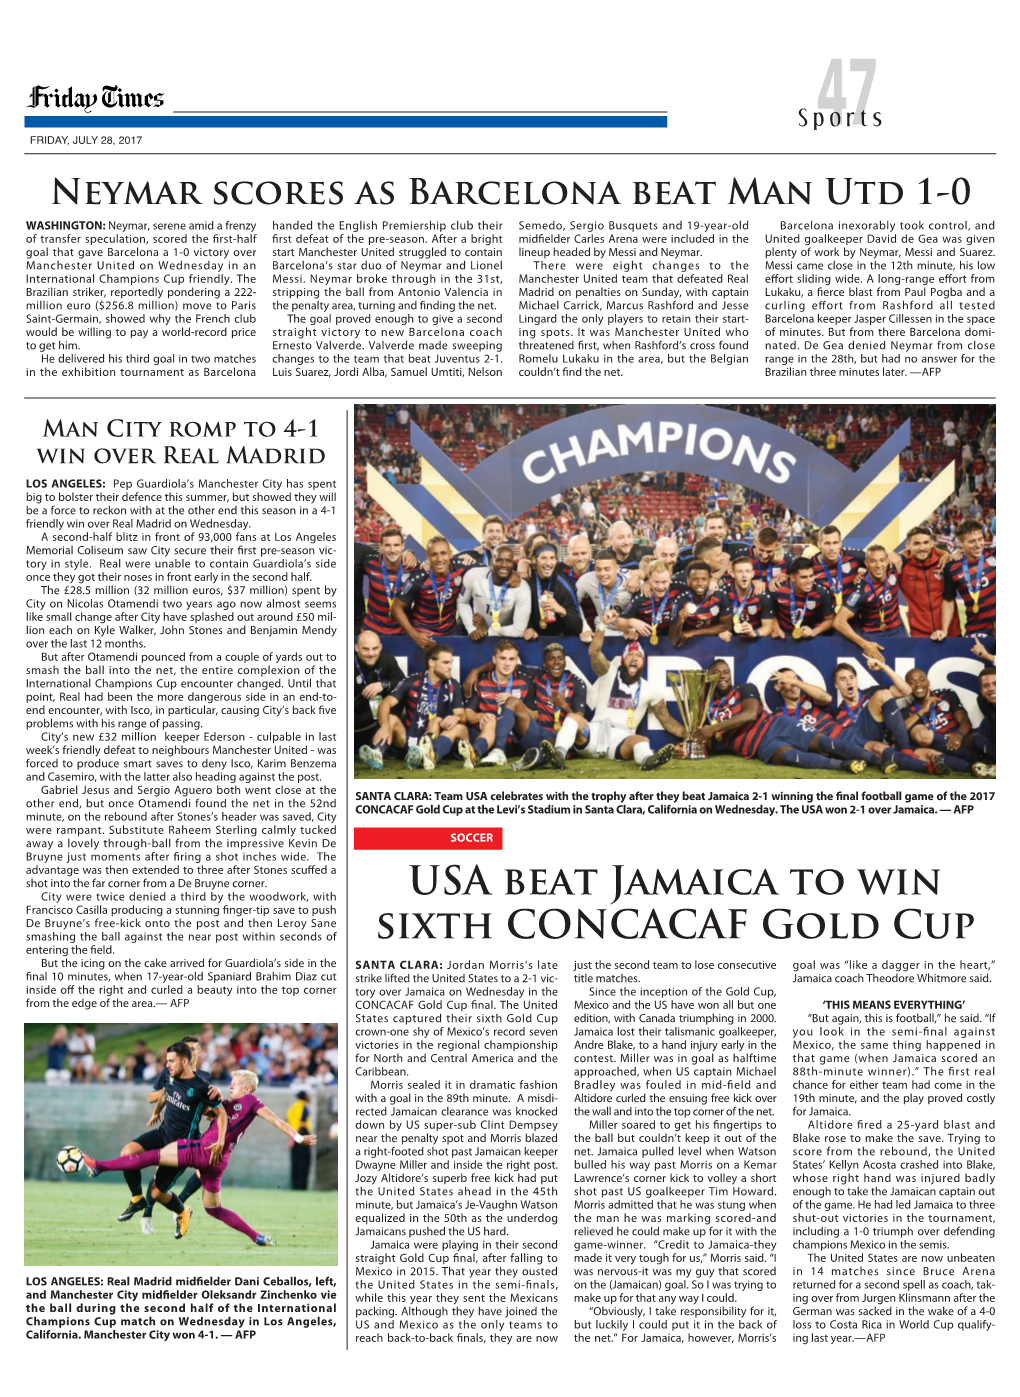 USA Beat Jamaica to Win Sixth CONCACAF Gold